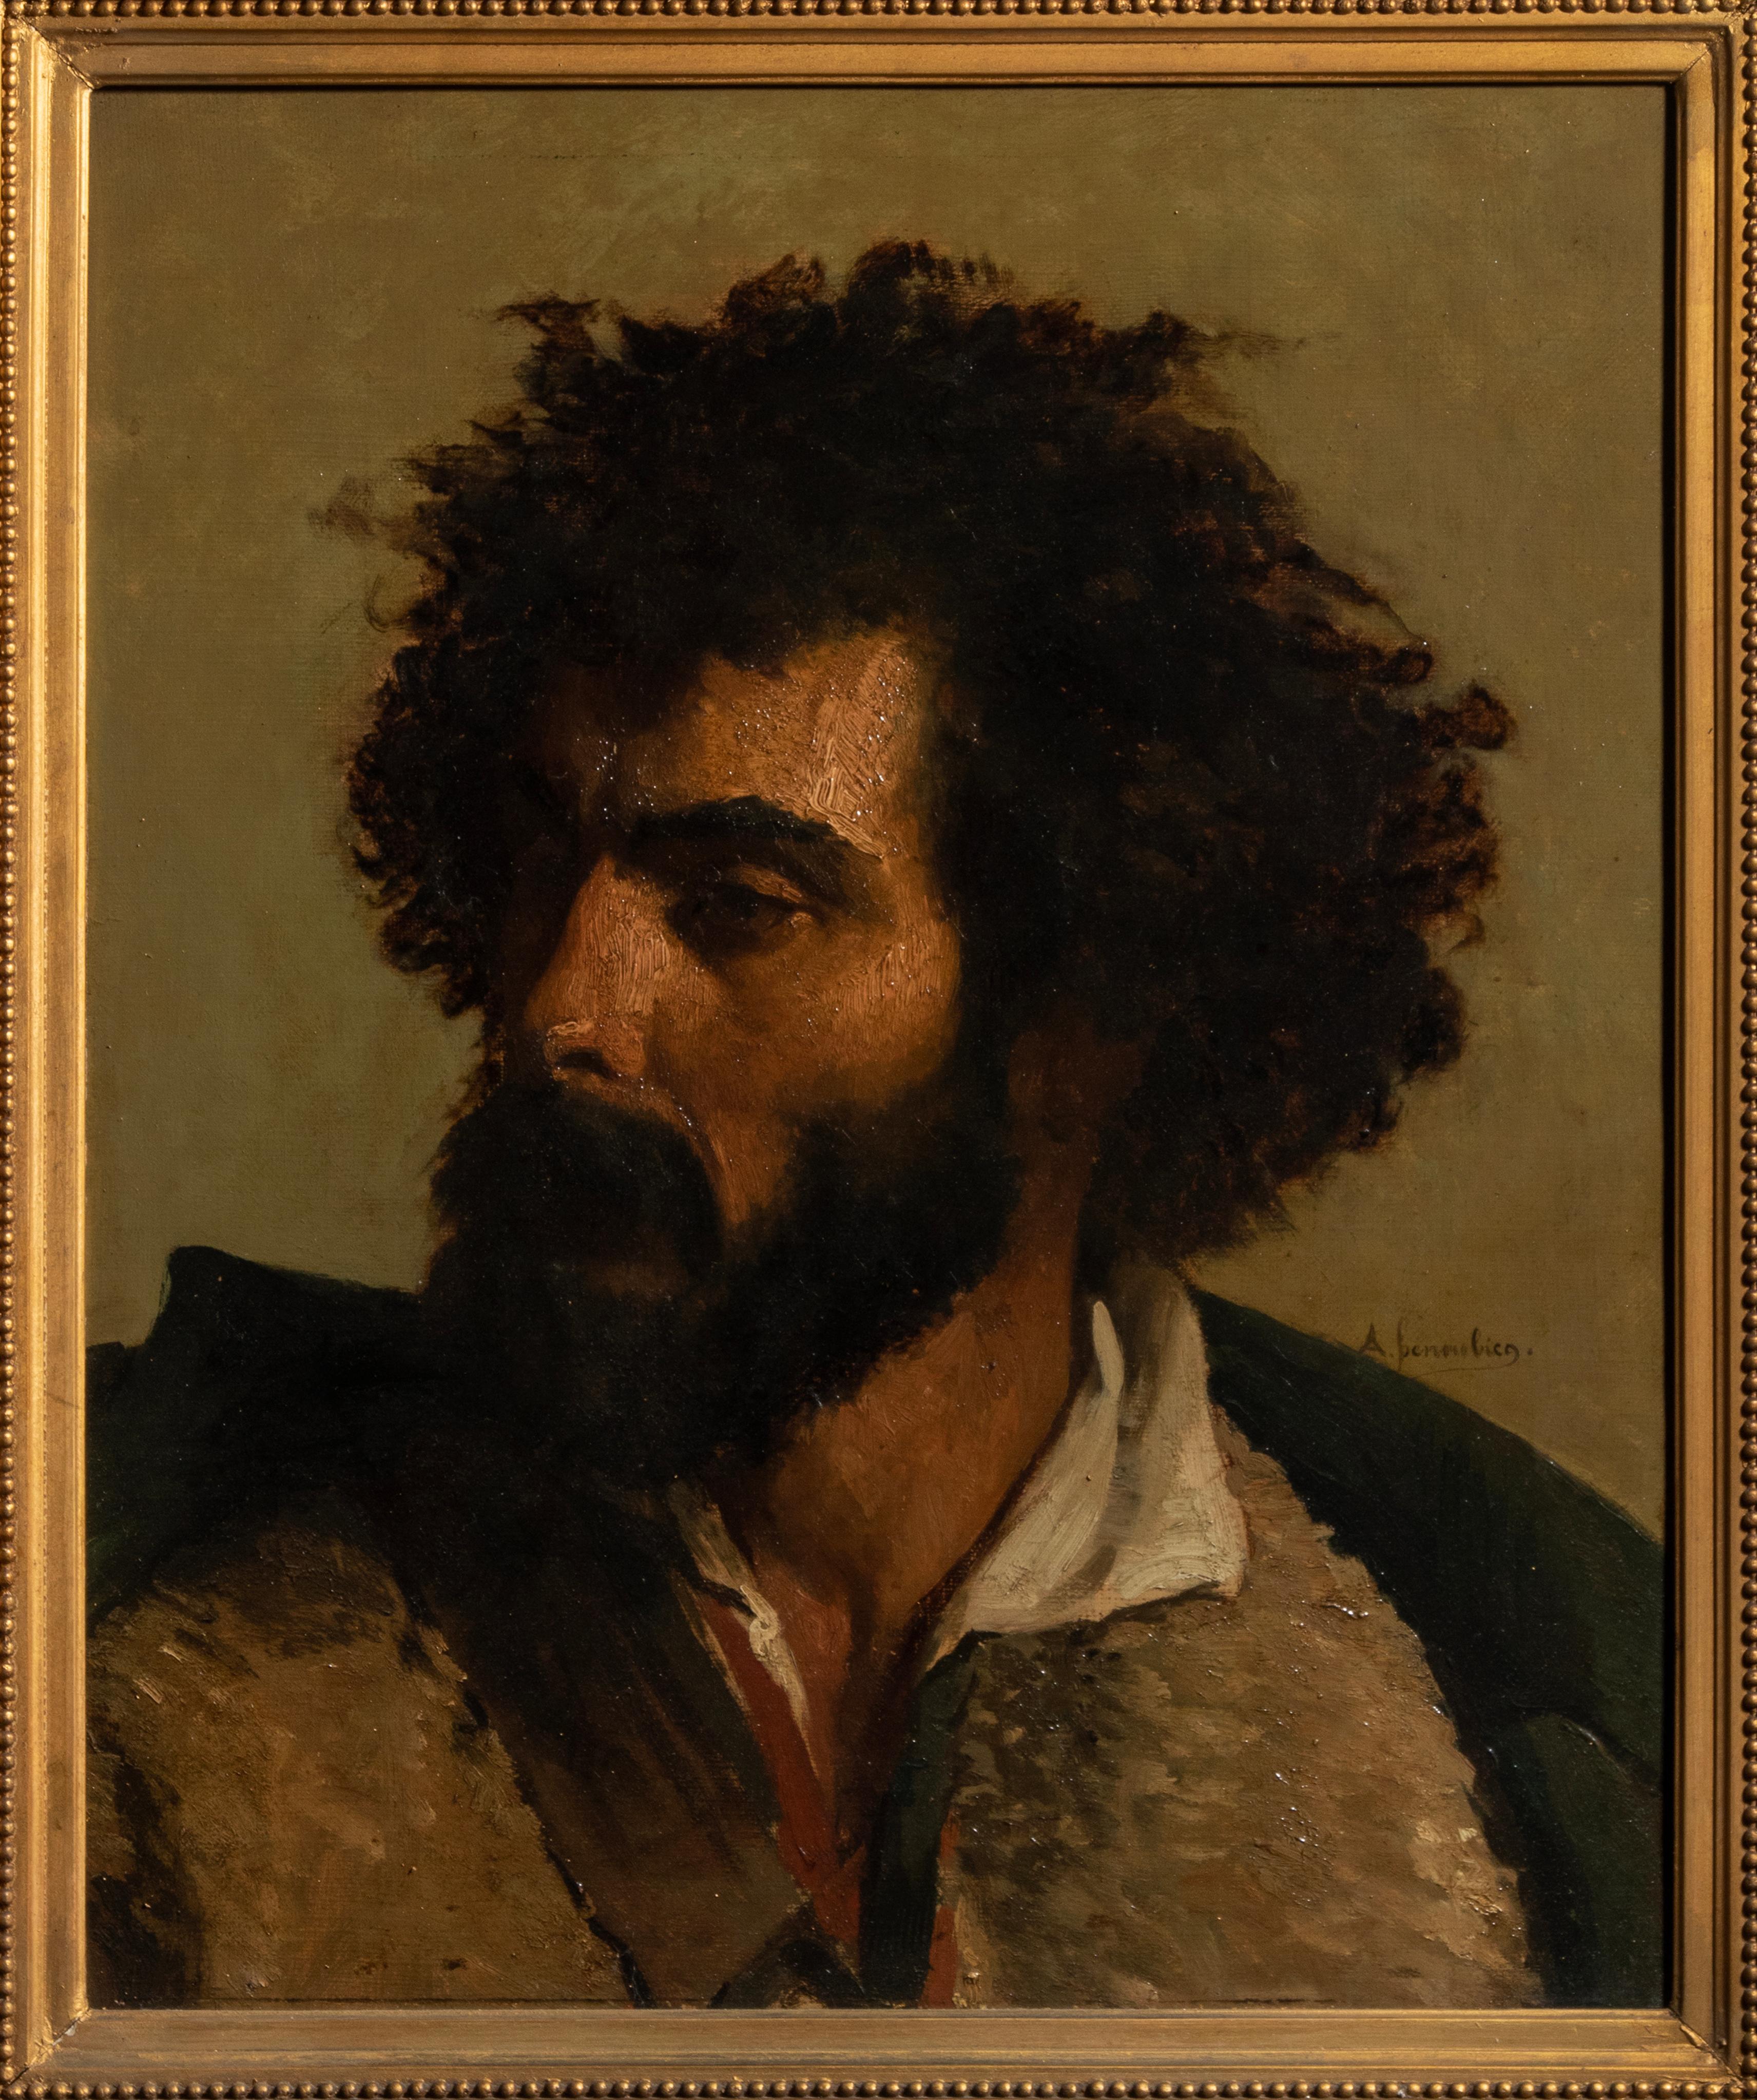 An Orientalist oil on canvas painting of a man, probably an Maroccan shepherd, Hennebicq was active in Marocco.
Dimensions frame: 73 x 64 cm
Dimensions canvas: 50 x 41 cm
It is a beautiful painting, a clear portrait of a 'local' man at the time,